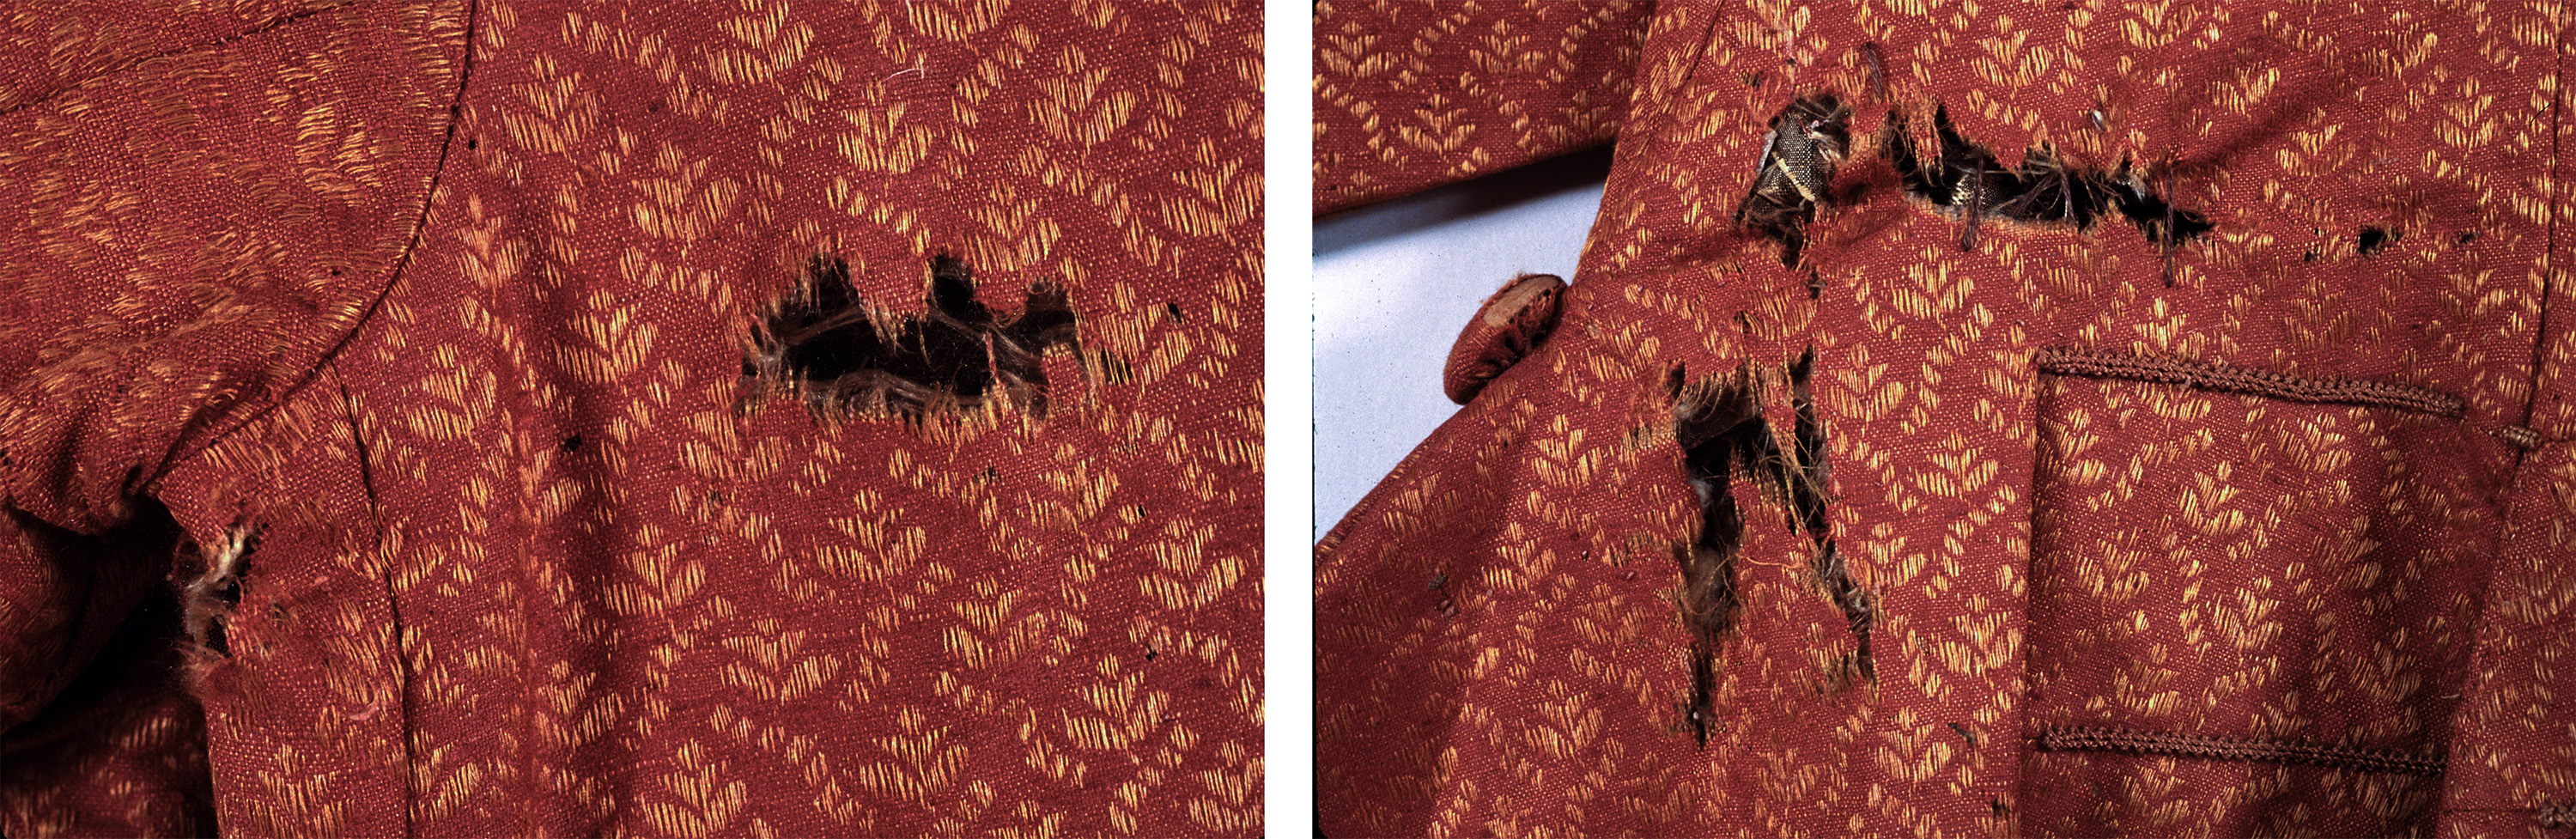 (Left: back of shoulder; Right: back of waist) Boy’s Coat, Italy, 1720–30, Los Angeles County Museum of Art, gift of Sanford and Mary Jane Bloom, photos by Catherine McLean